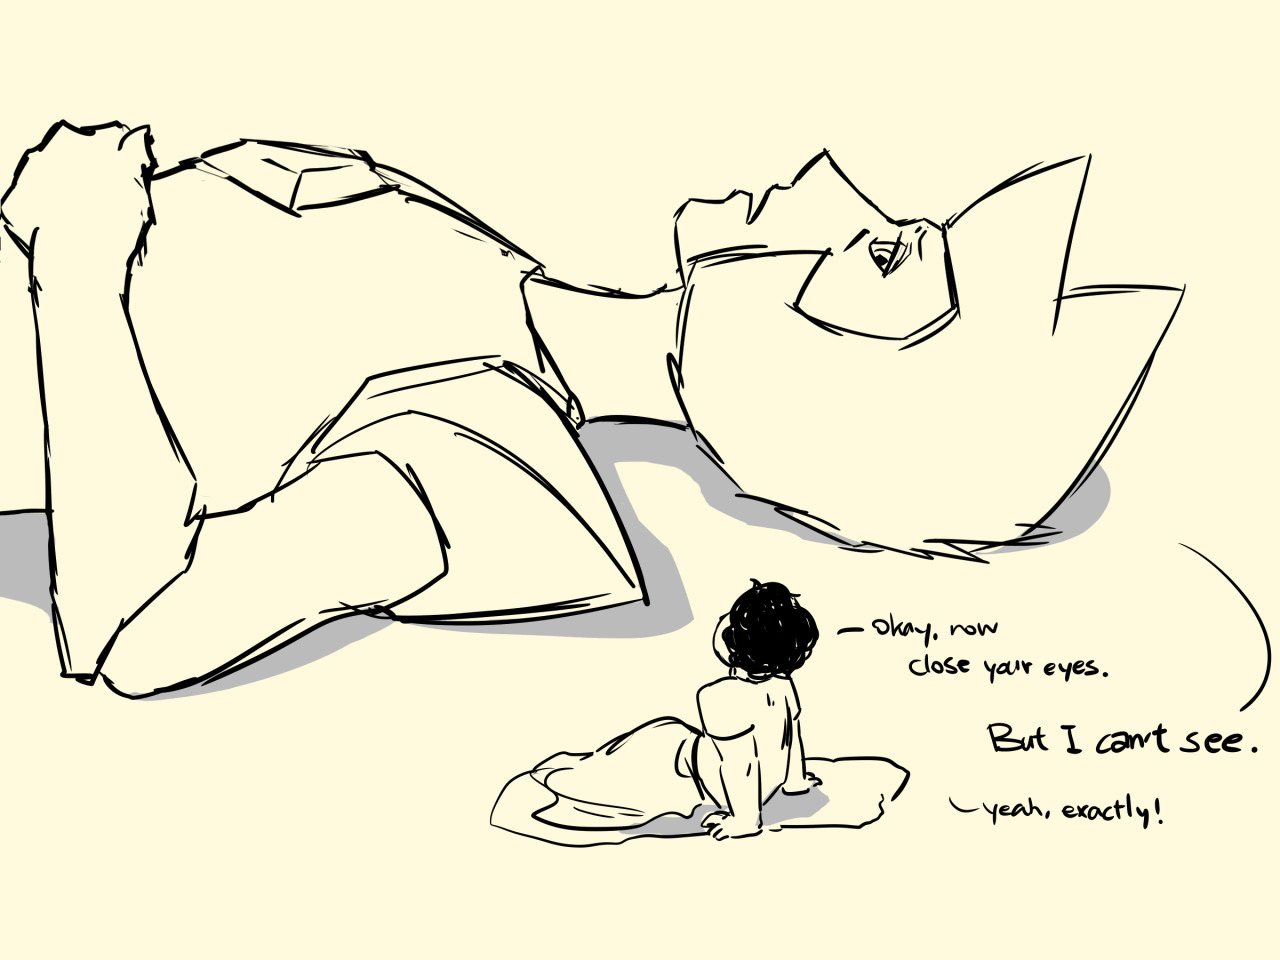 pixiedustandfairypowers said: Can you draw Steven teaching Yellow Diamond how to sleep? Answer: (In case the text is too small: Steven-”Okay, now close your eyes.” YD-”But I can’t see.” Steven-”Yeah,...